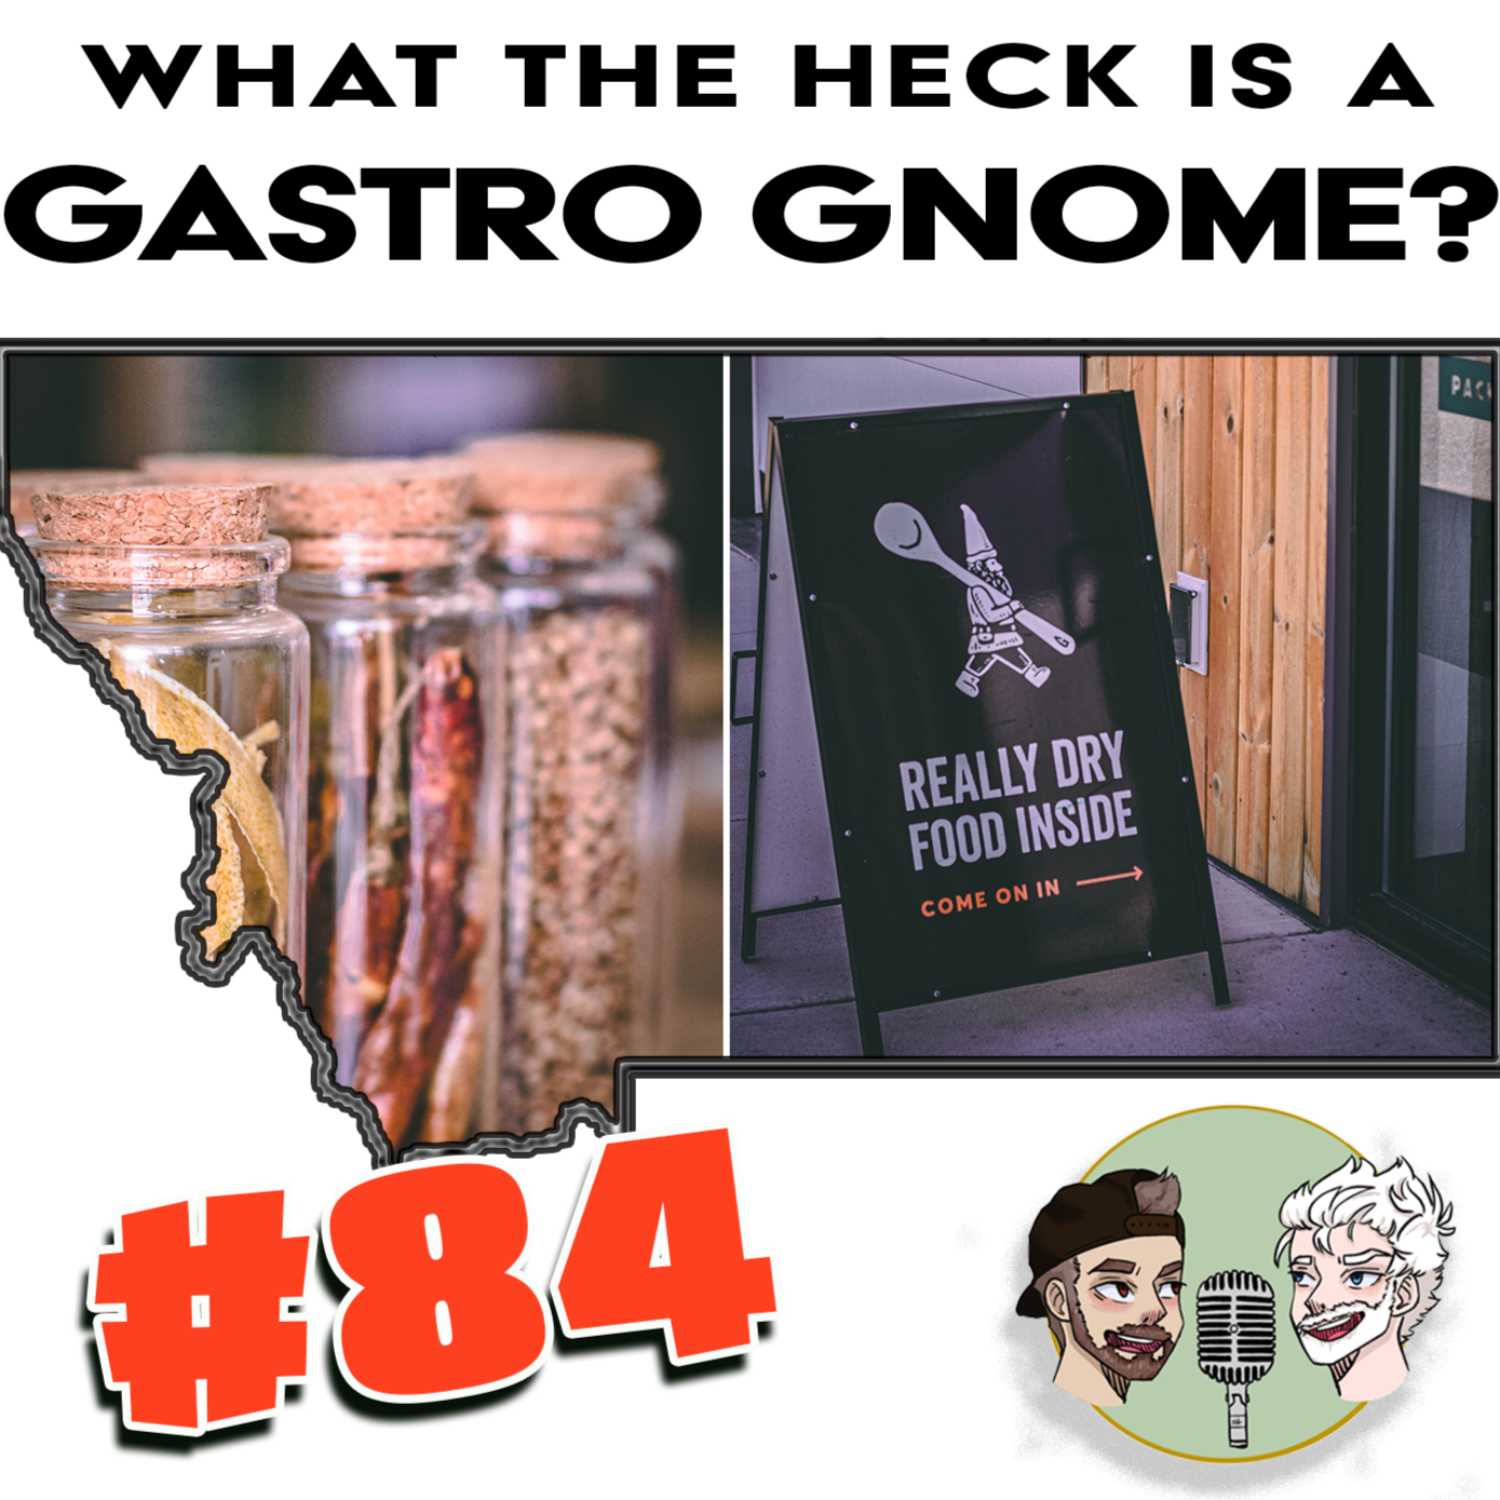 84: What the Heck is a Gastro Gnome?